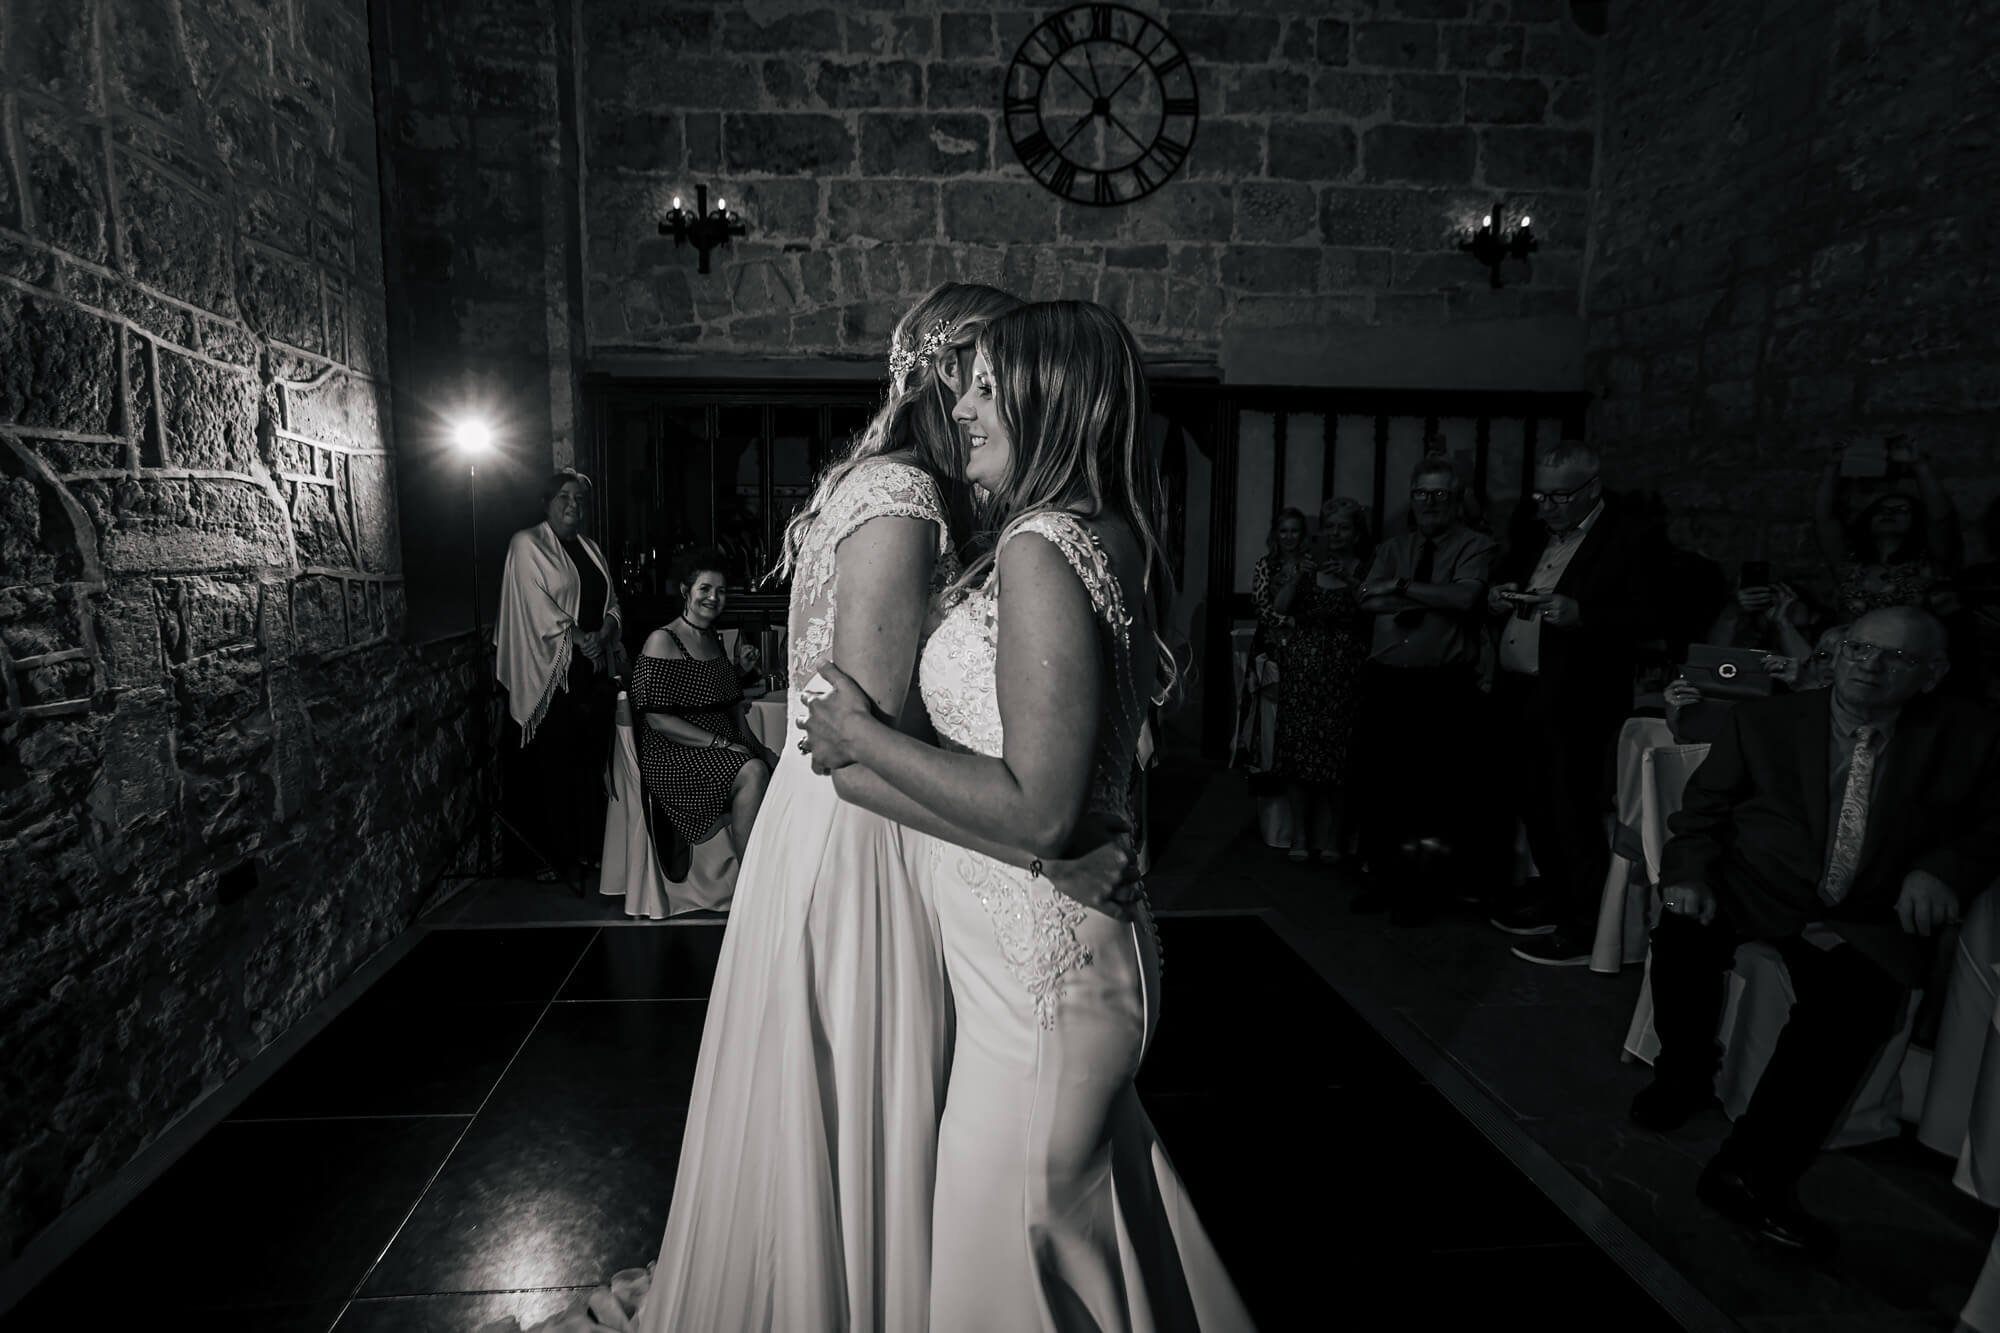 Two brides doing their first dance at a wedding